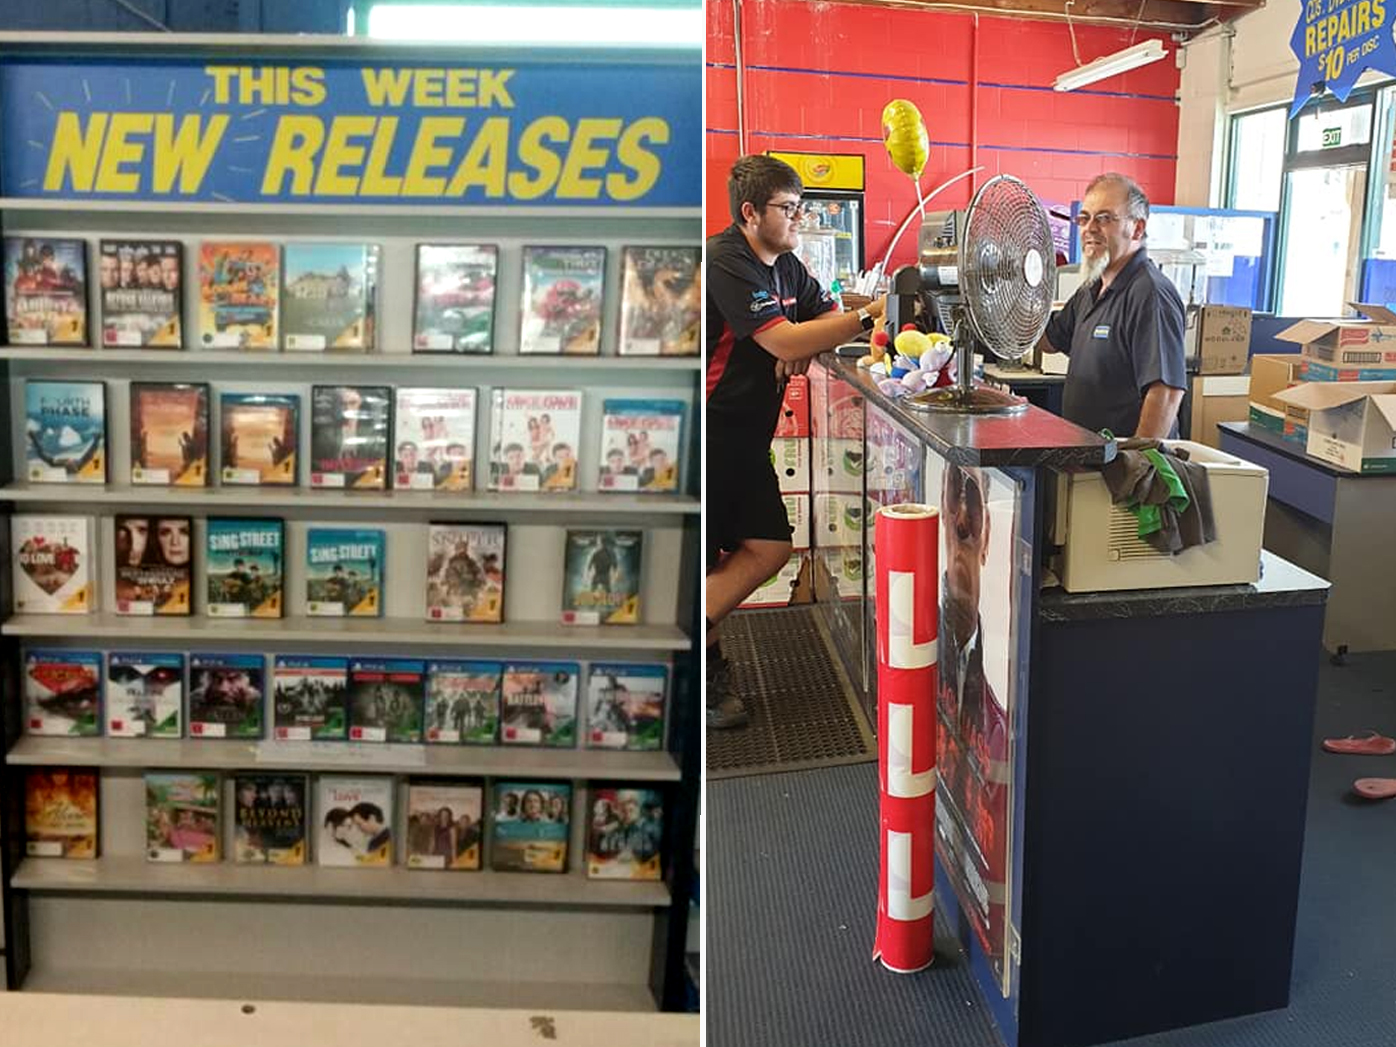 Store owner Chris Cucurullo serves a customer. When he bought the business the video rental store stocked just 7000 movies. Seven years later, Mr Cucurullo had built the library to more than 20,000 titles.